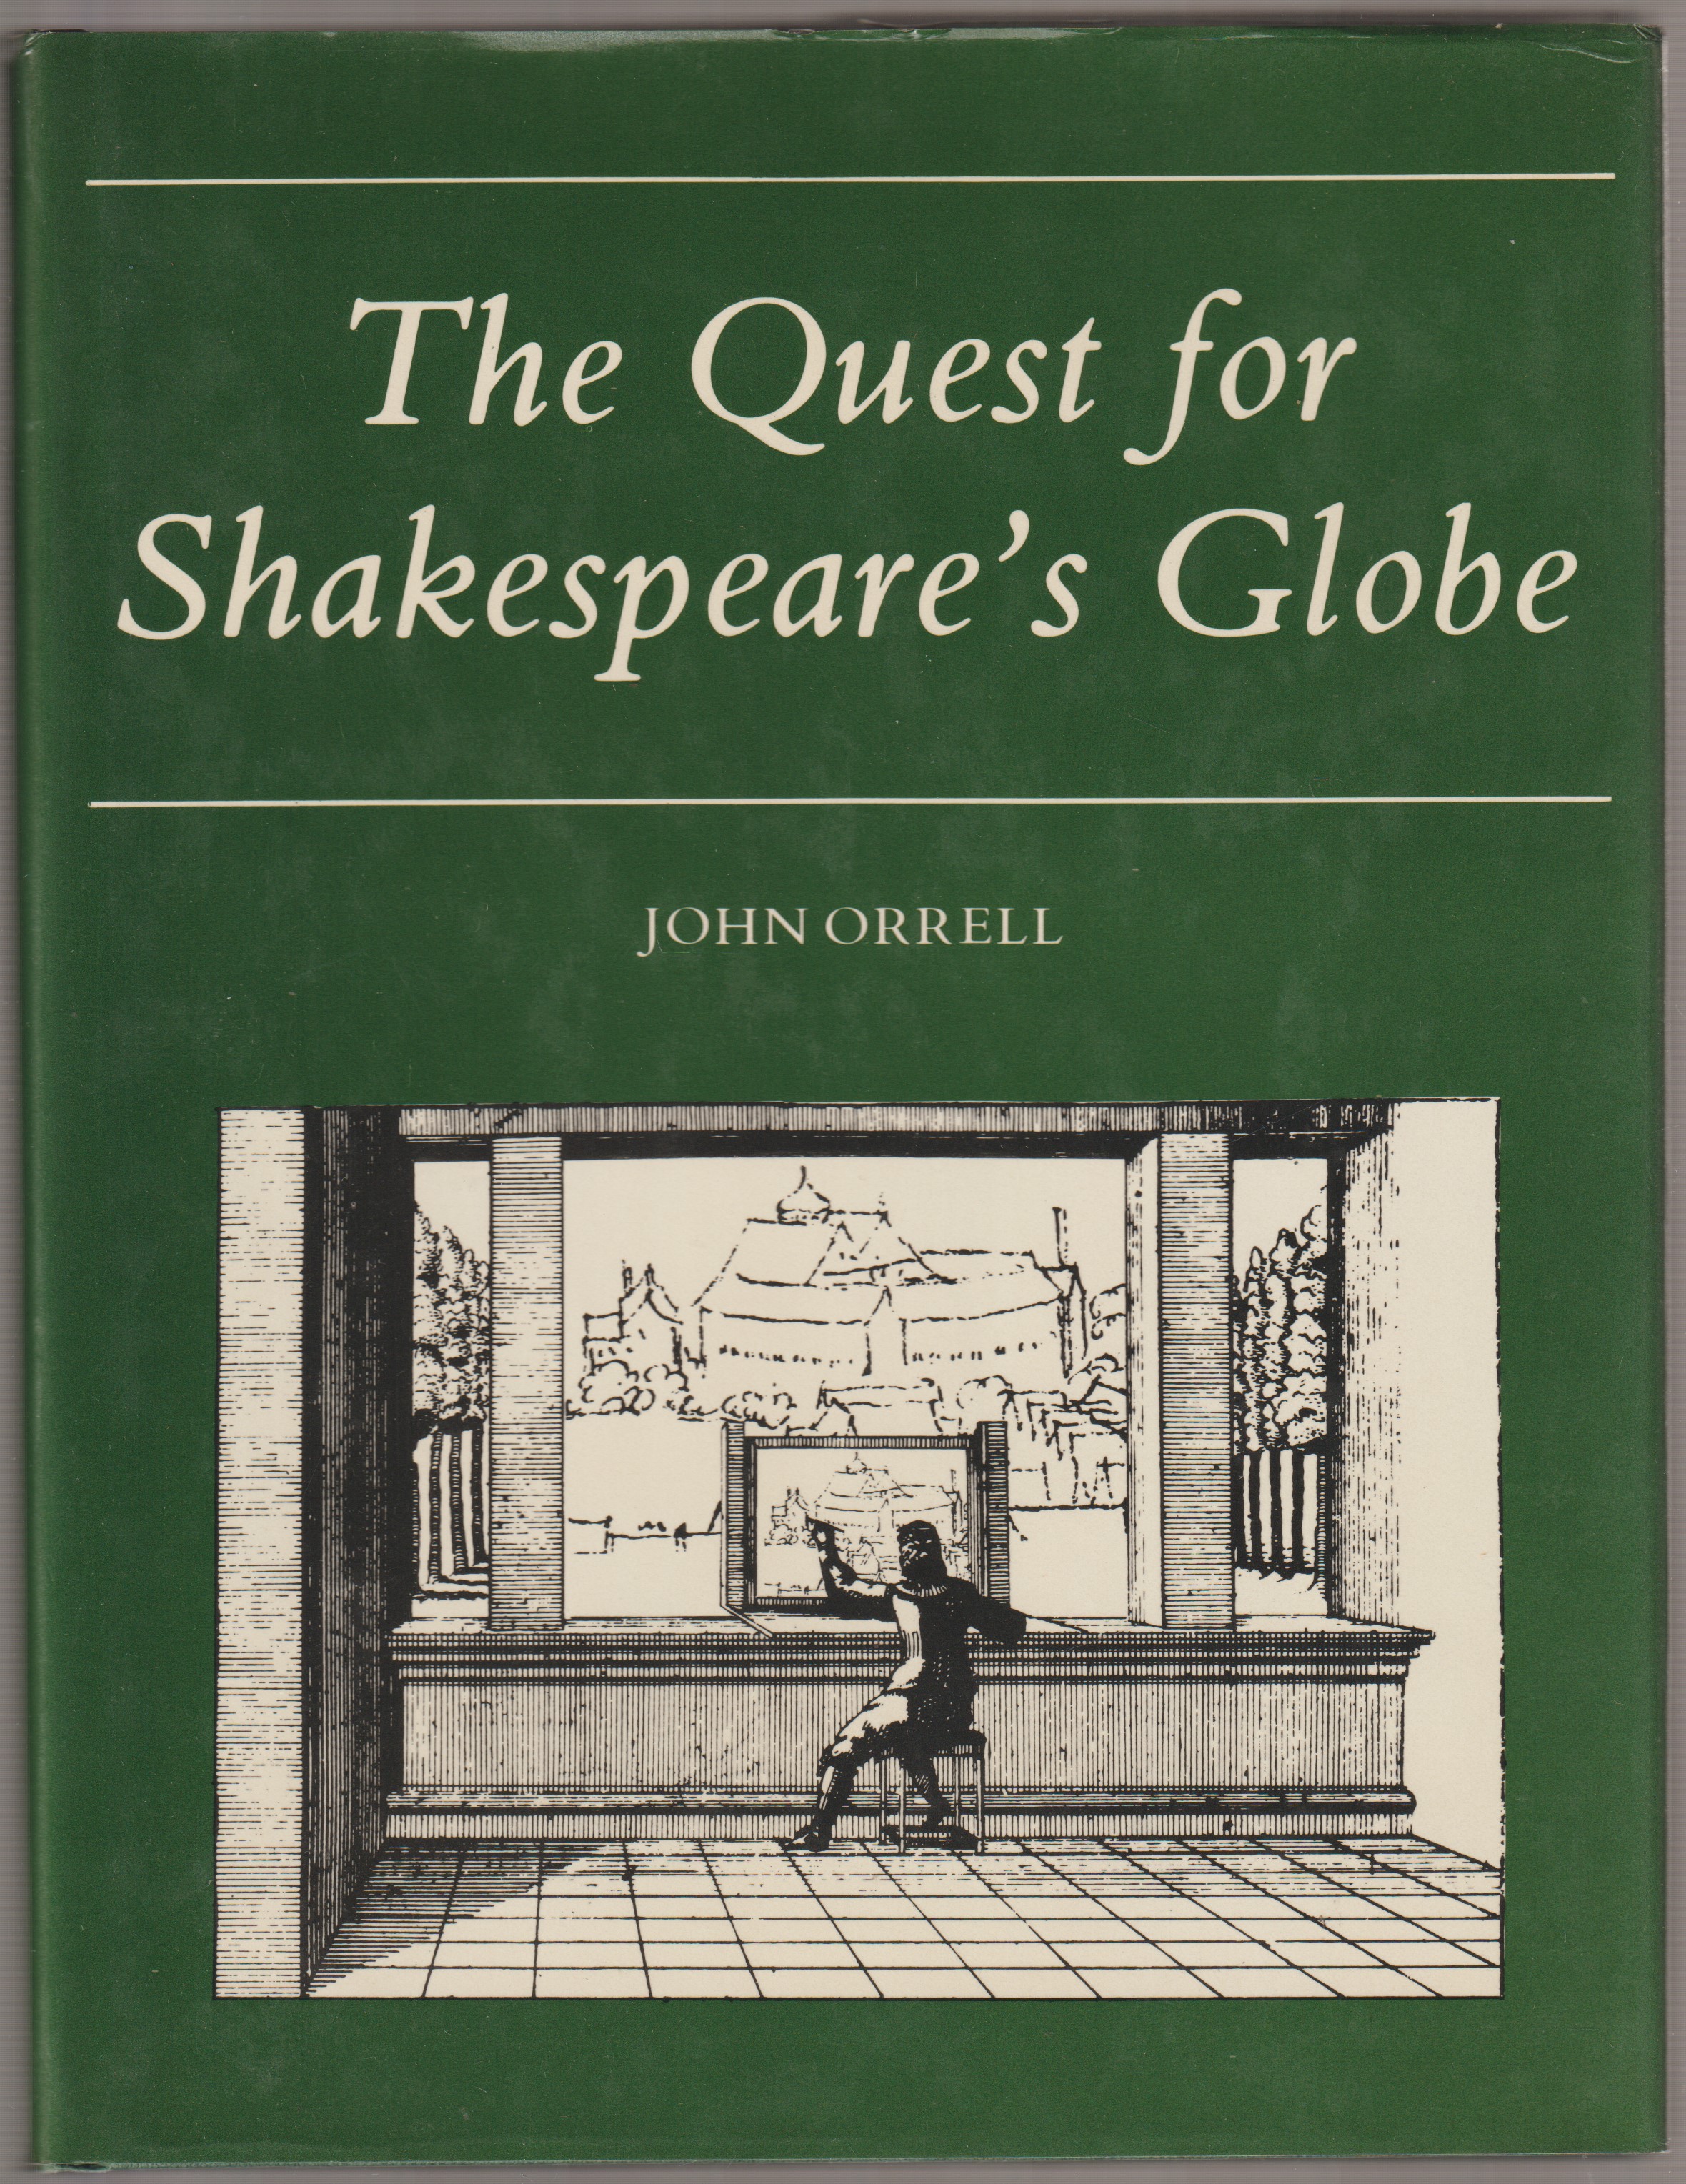 The quest for Shakespeare's Globe.